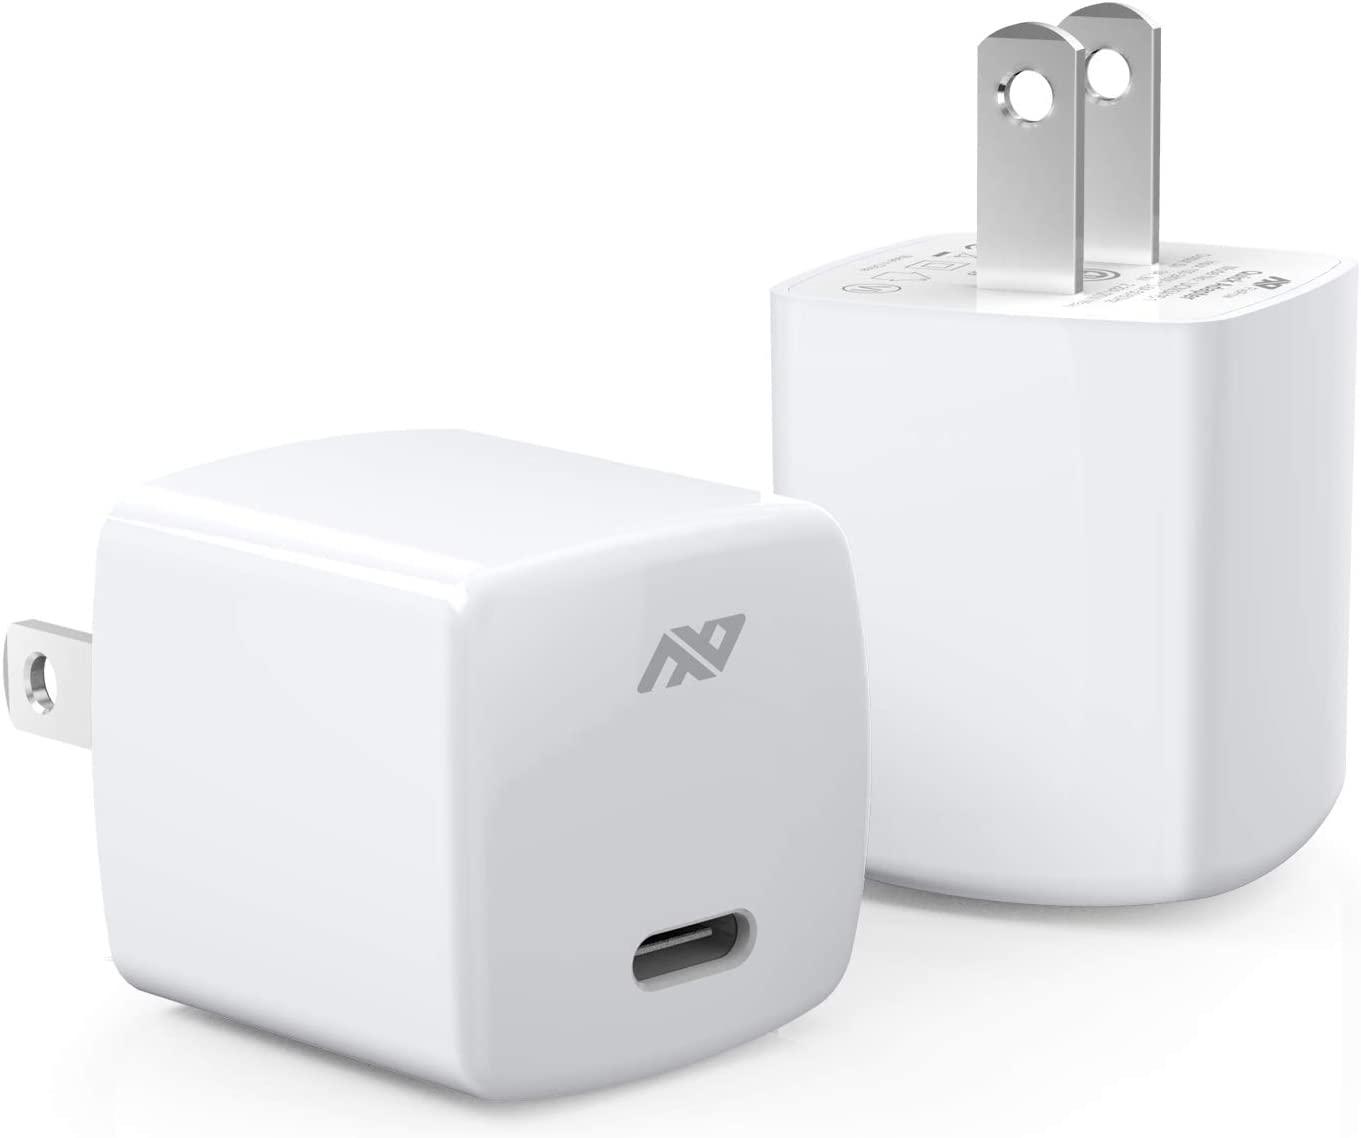 2 FlePow 20w USB C Wall Chargers for $8.14